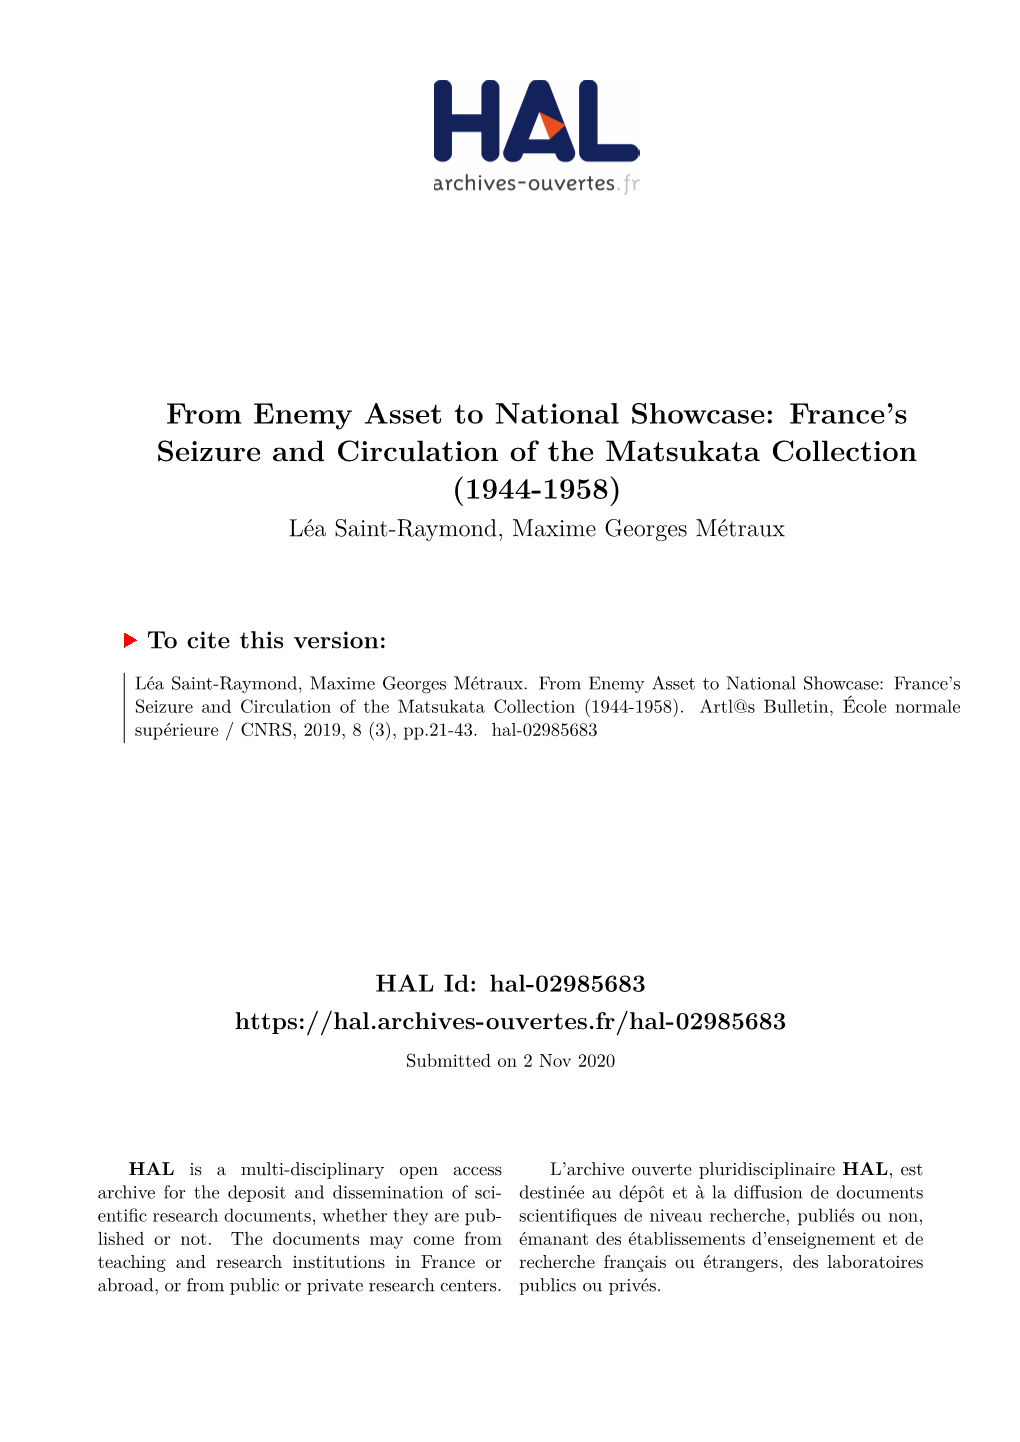 From Enemy Asset to National Showcase: France’S Seizure and Circulation of the Matsukata Collection (1944-1958) Léa Saint-Raymond, Maxime Georges Métraux